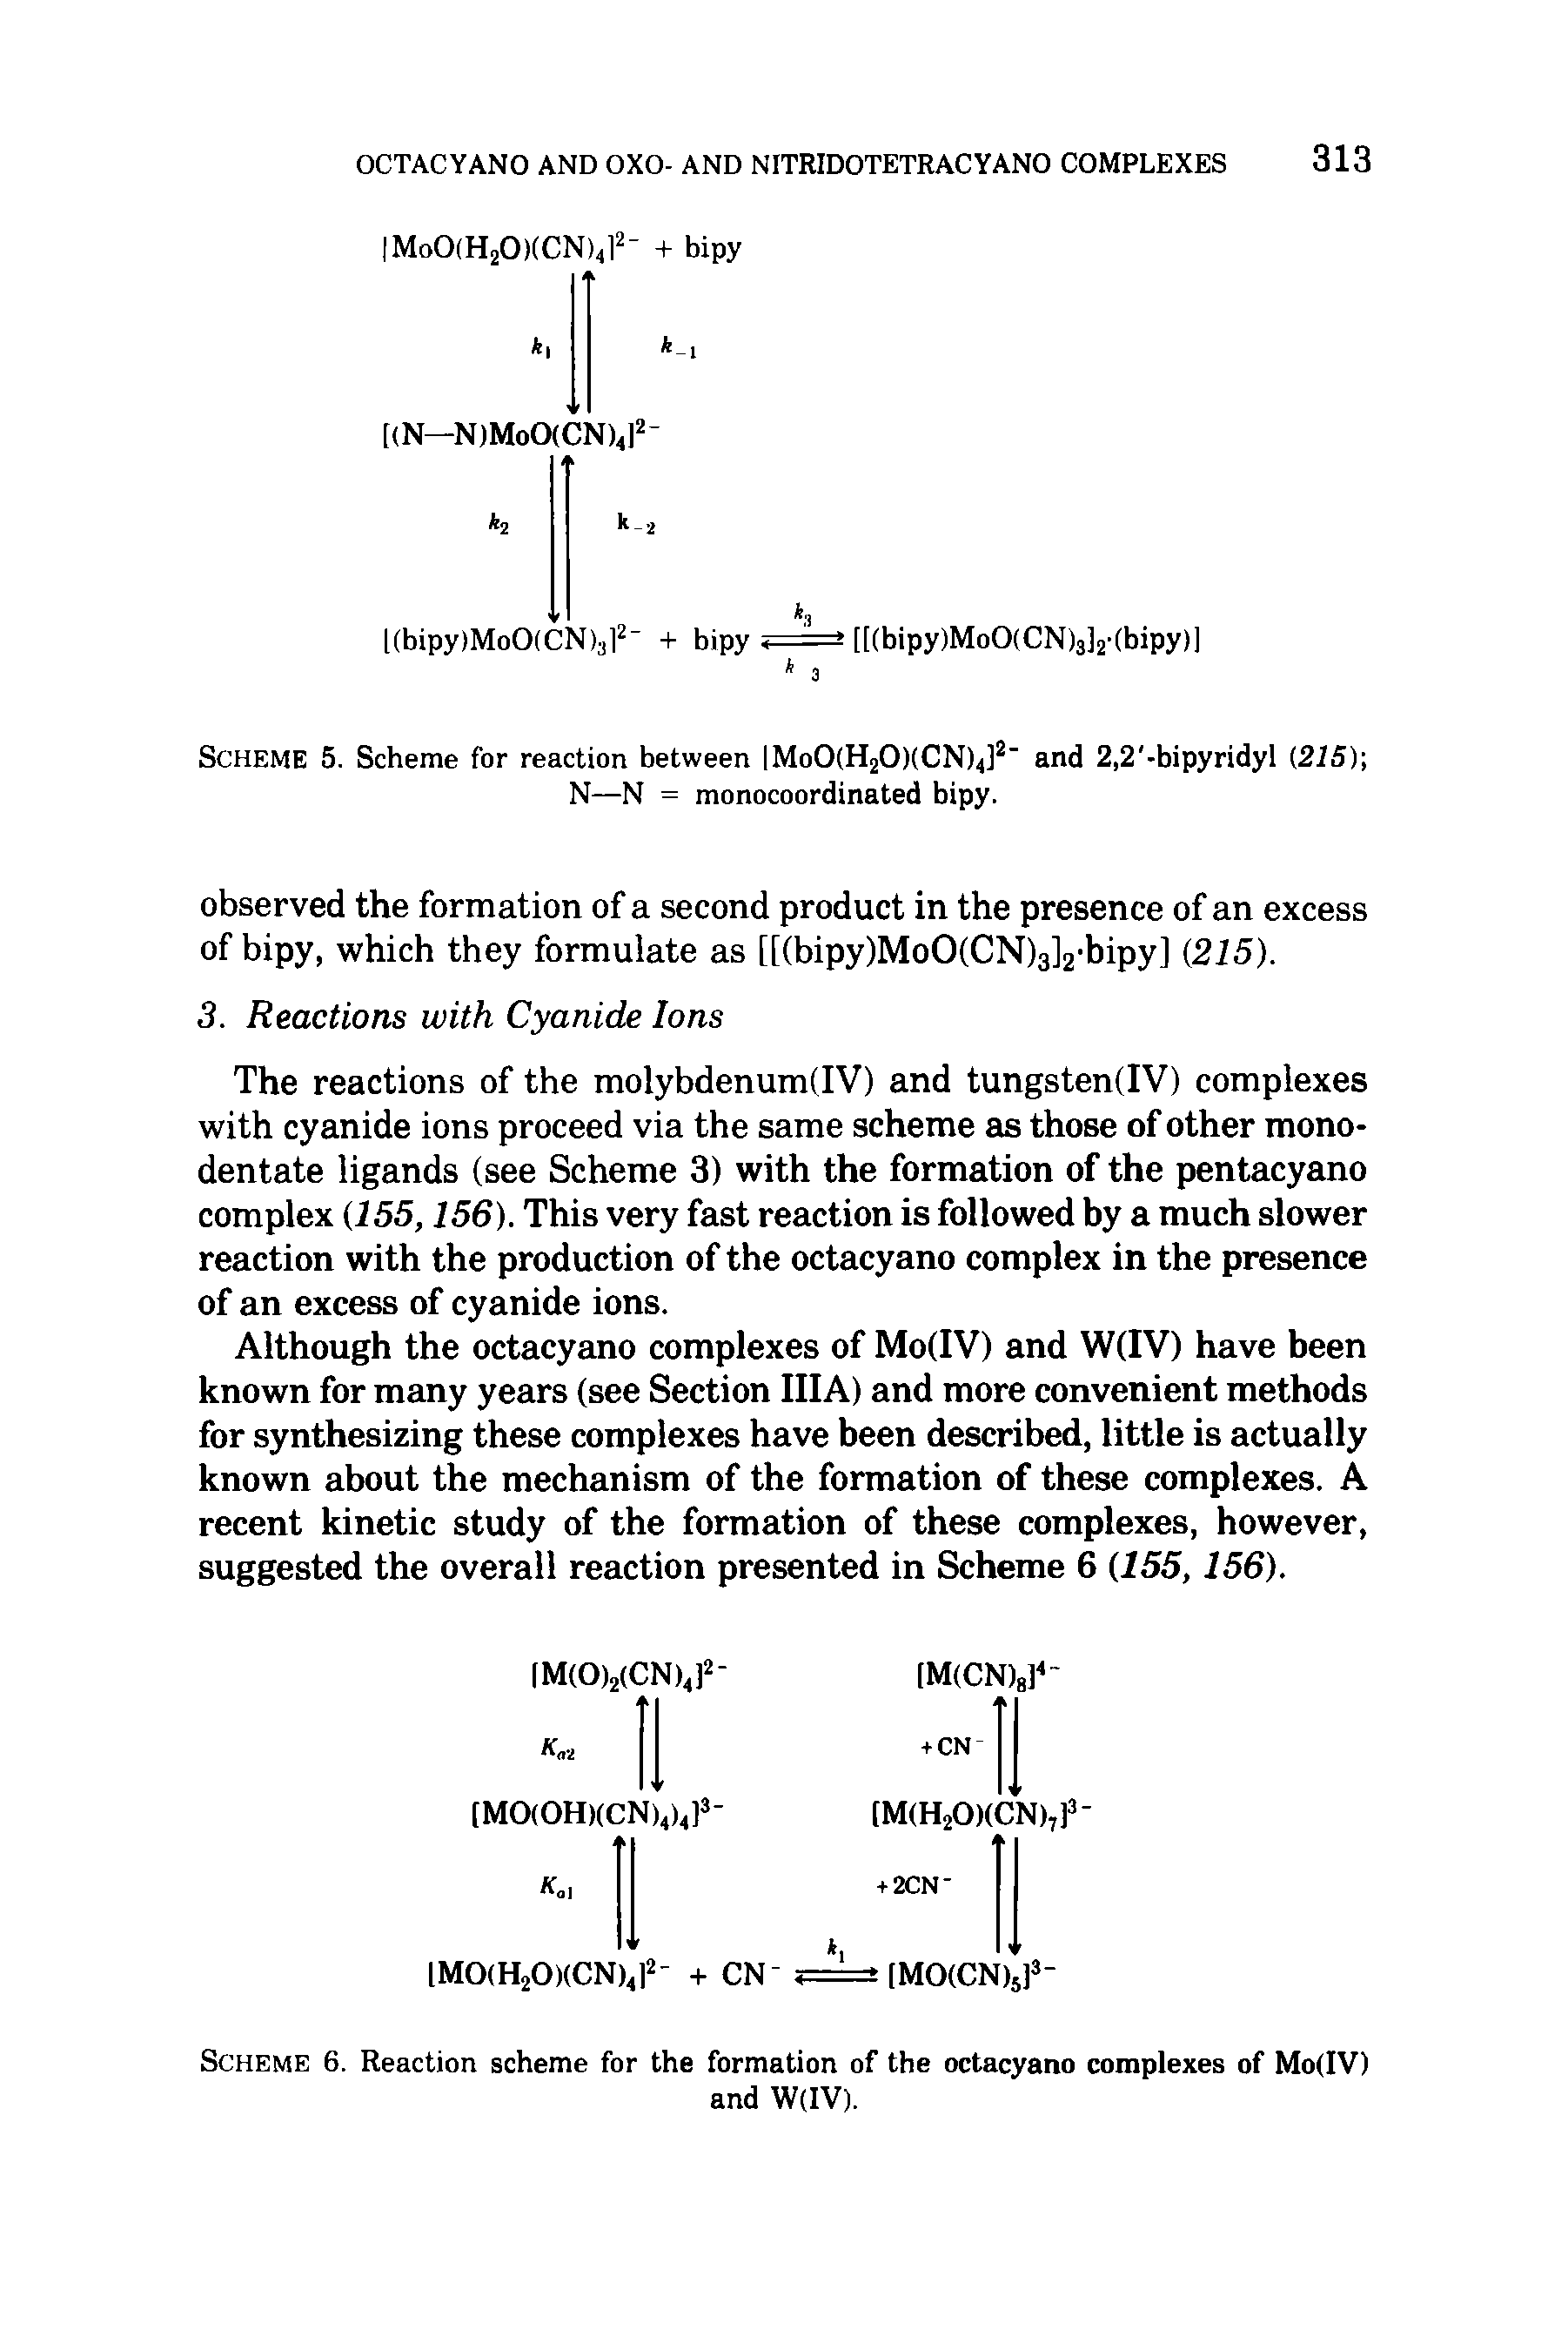 Scheme 6. Reaction scheme for the formation of the octacyano complexes of Mo(IV)...